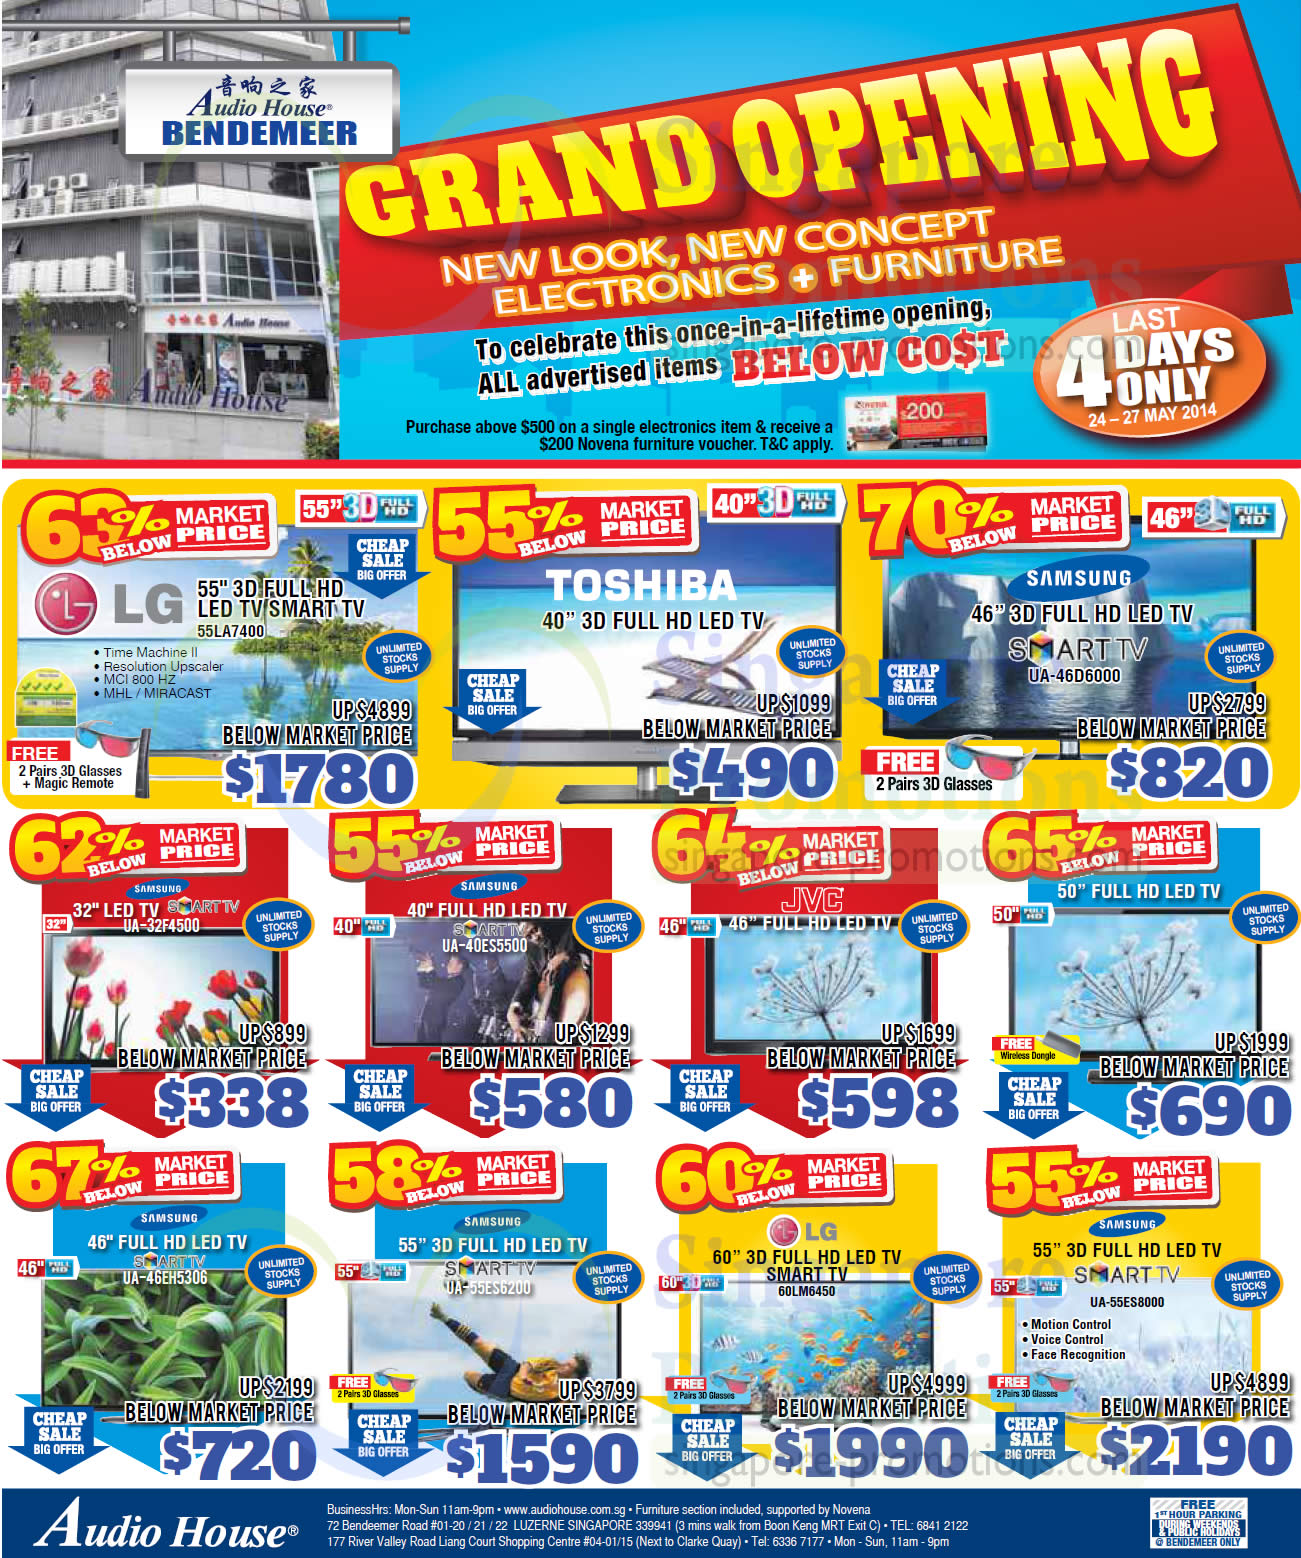 Featured image for Audio House Electronics, TV, Notebooks & Appliances Offers @ Bendemeer 24 - 27 May 2014